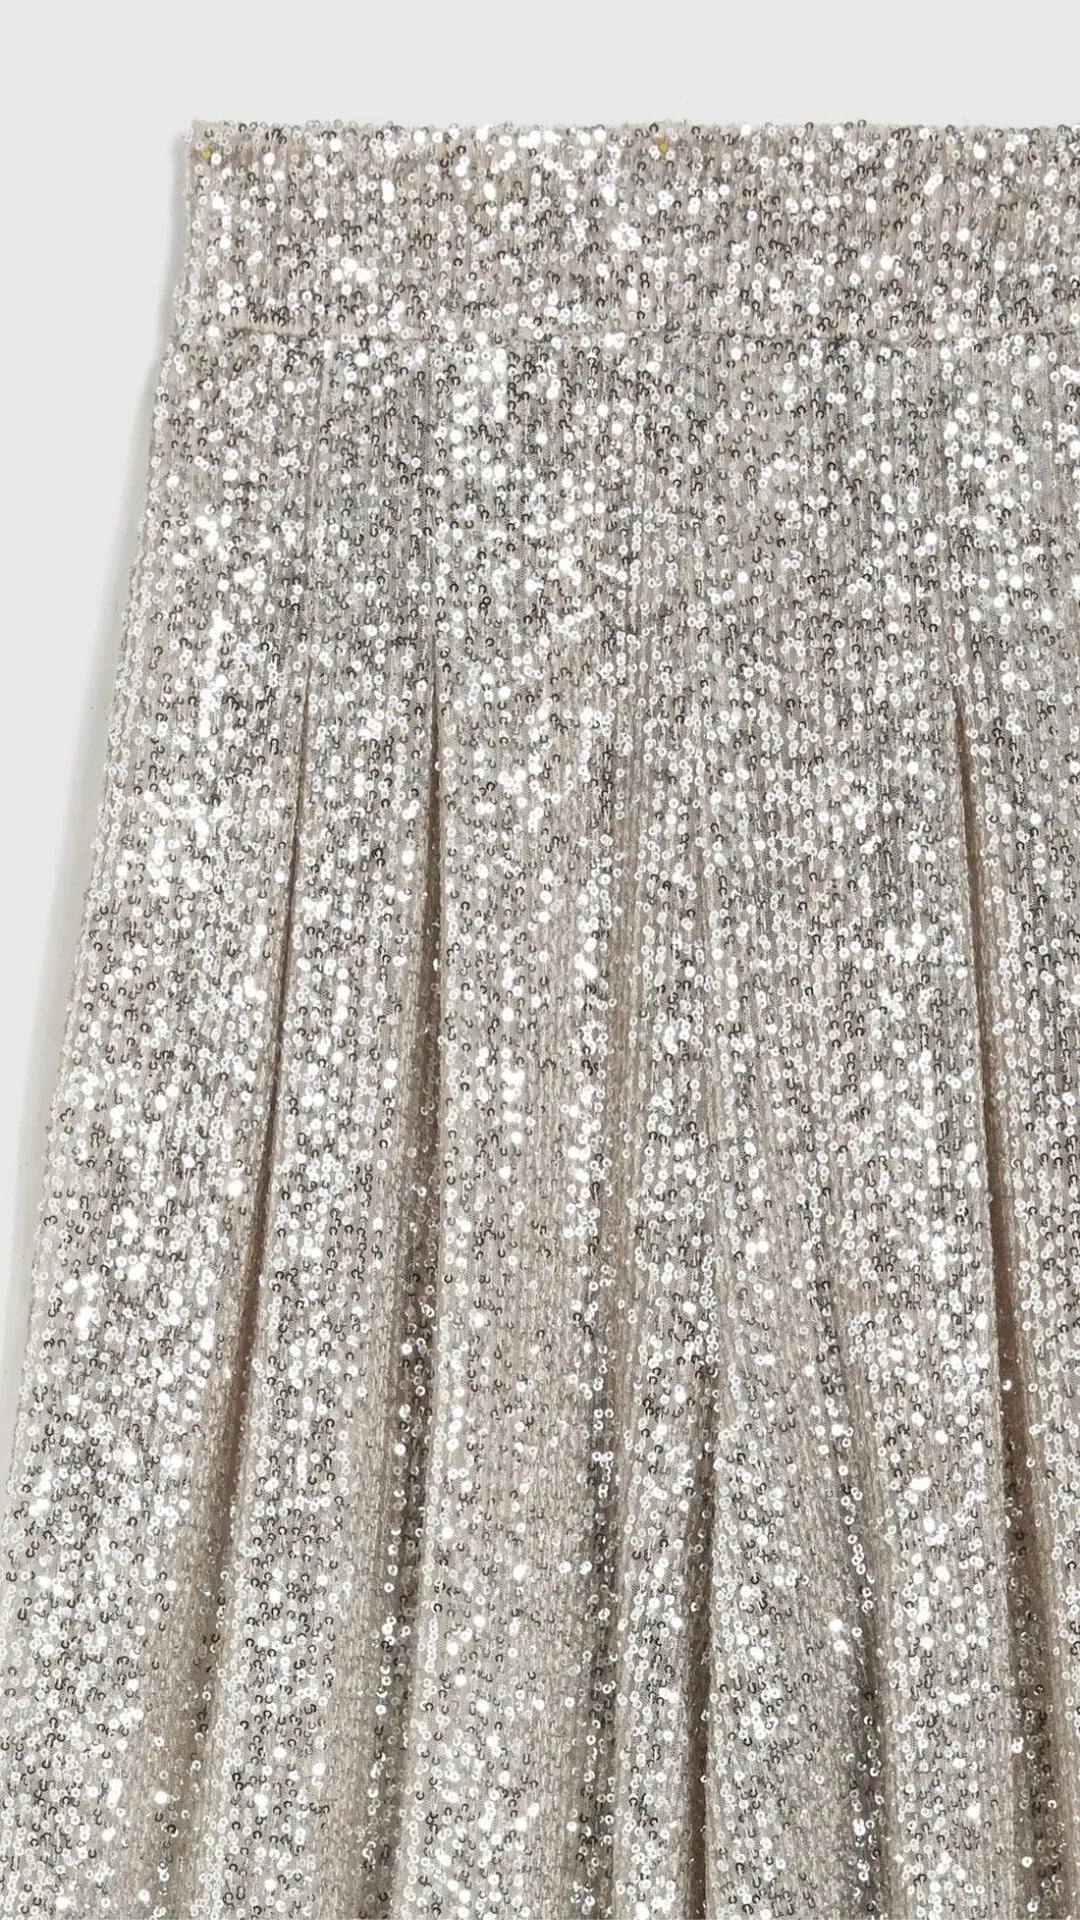 Rochas Paris Fashion High Waisted Sparkle Pants. Crafted in silver paillette sequins, they are tailored with a subtle front pleating and a fitted waist to create a slim, flattering silhouette. Product photo showcasing the detail of the sequins.